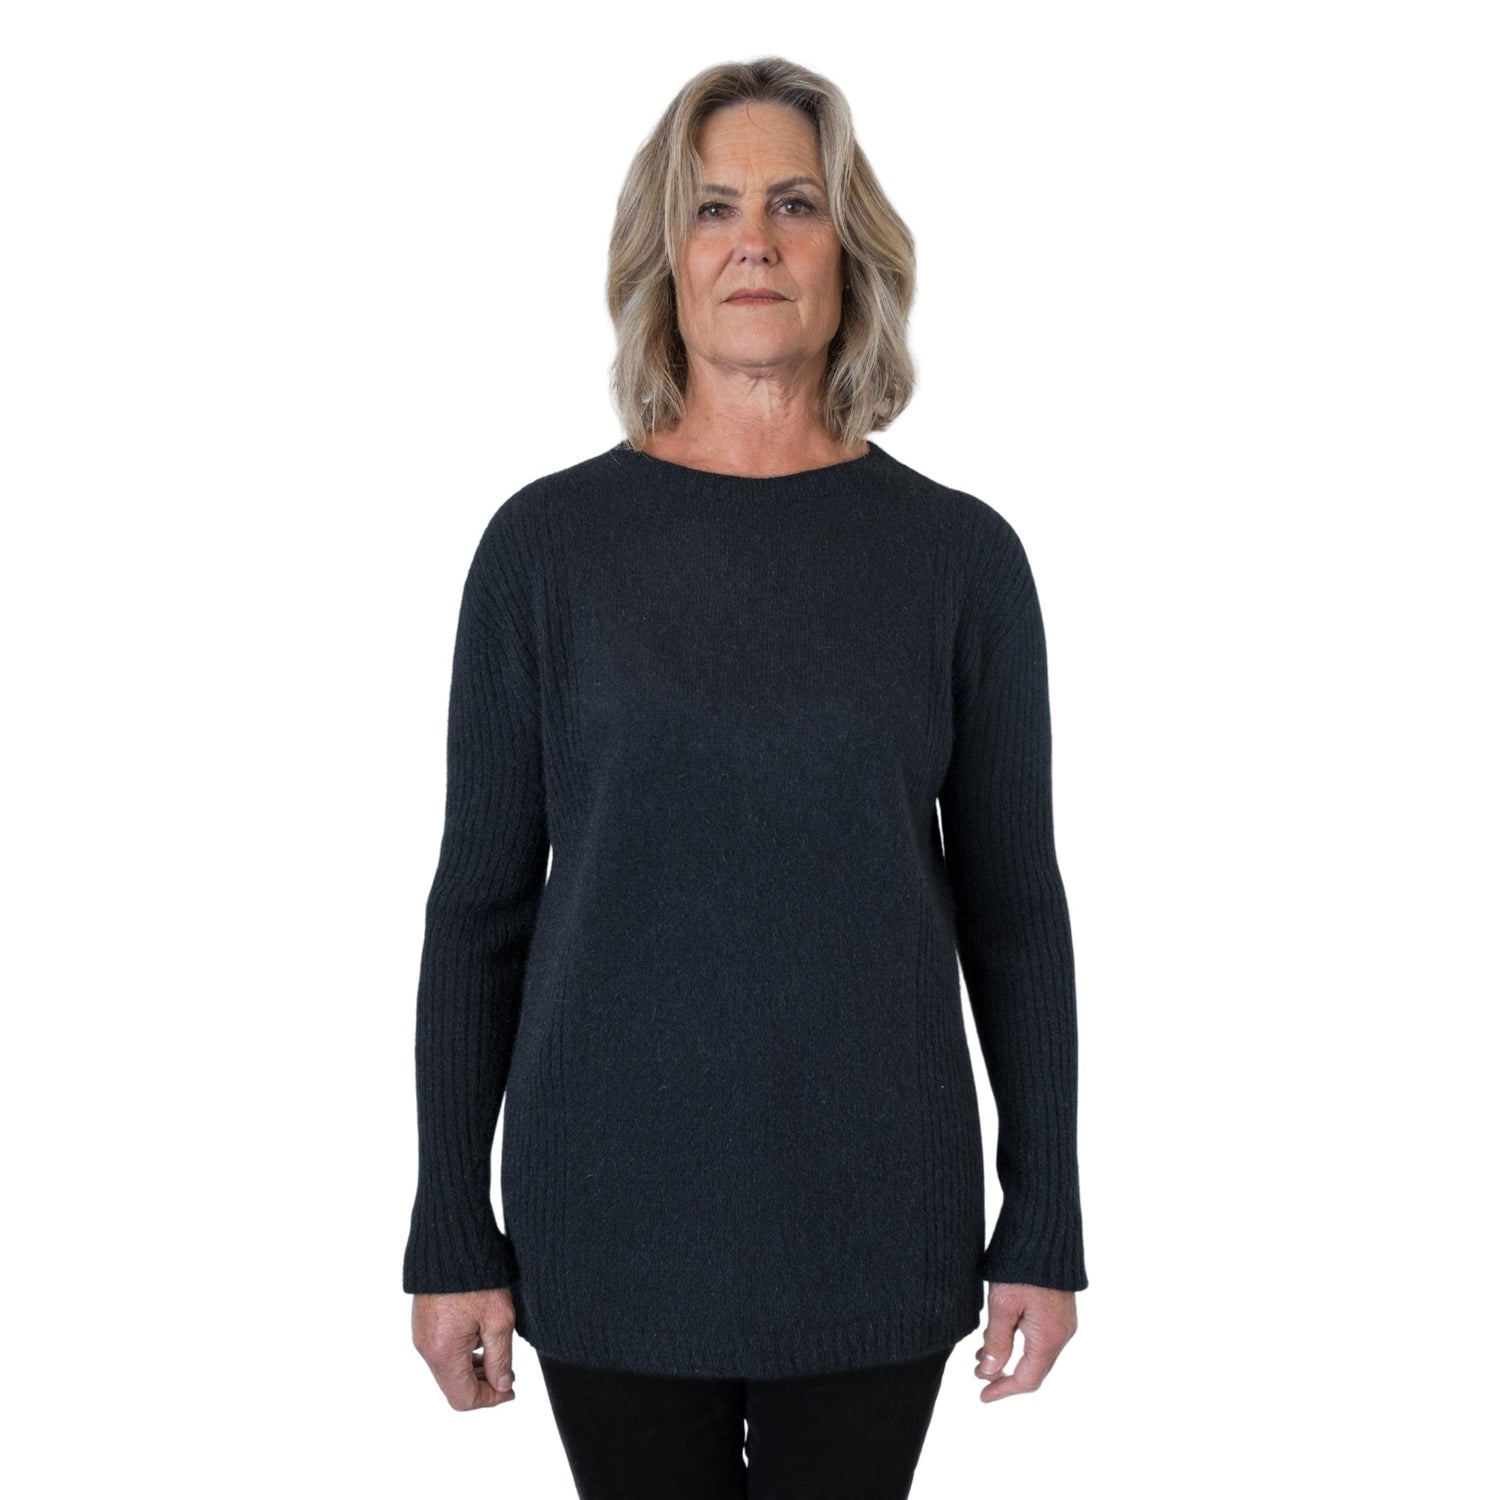 Side Rib sweater in colour Onyx. Front